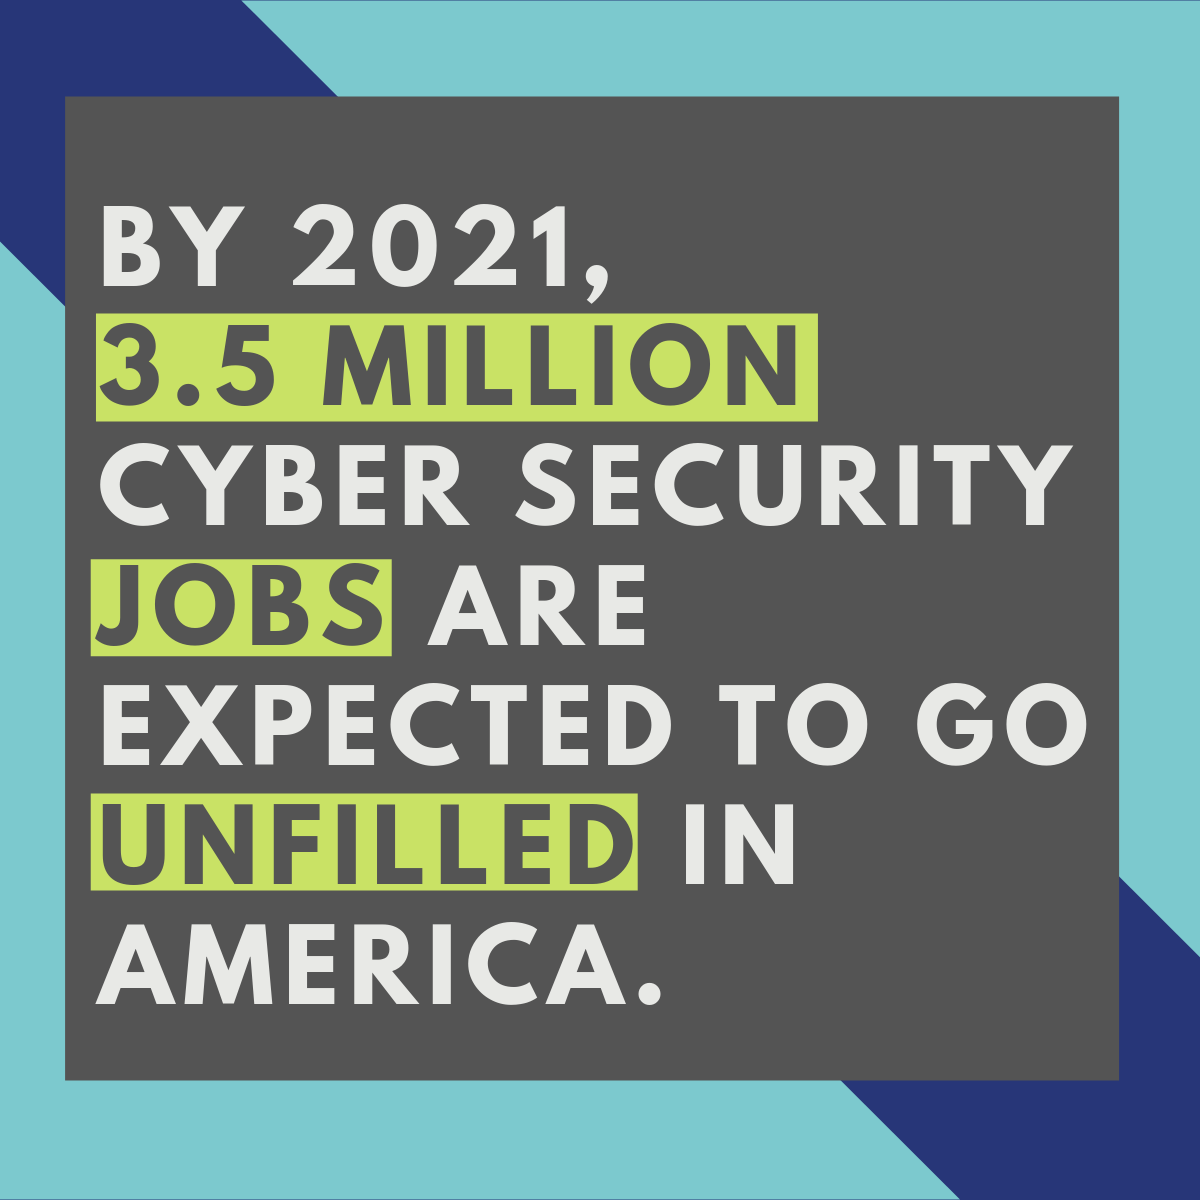 By 2021, 3.5 million cyber security jobs are expected to go unfilled in America.